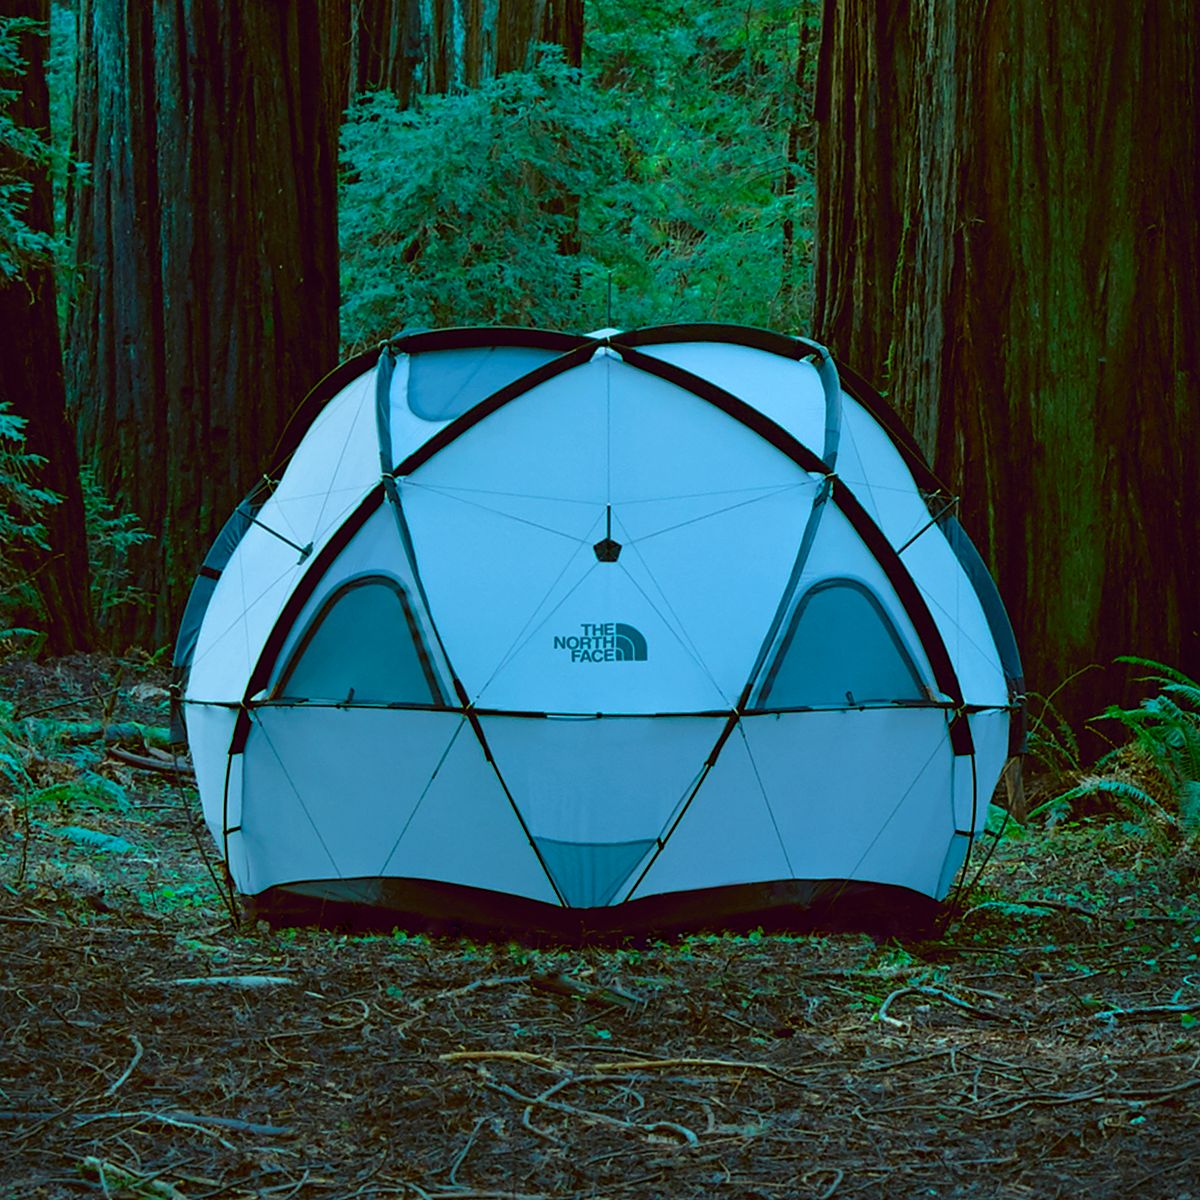 Camping in Yosemite with the Geodome 4 Tent from The North Face